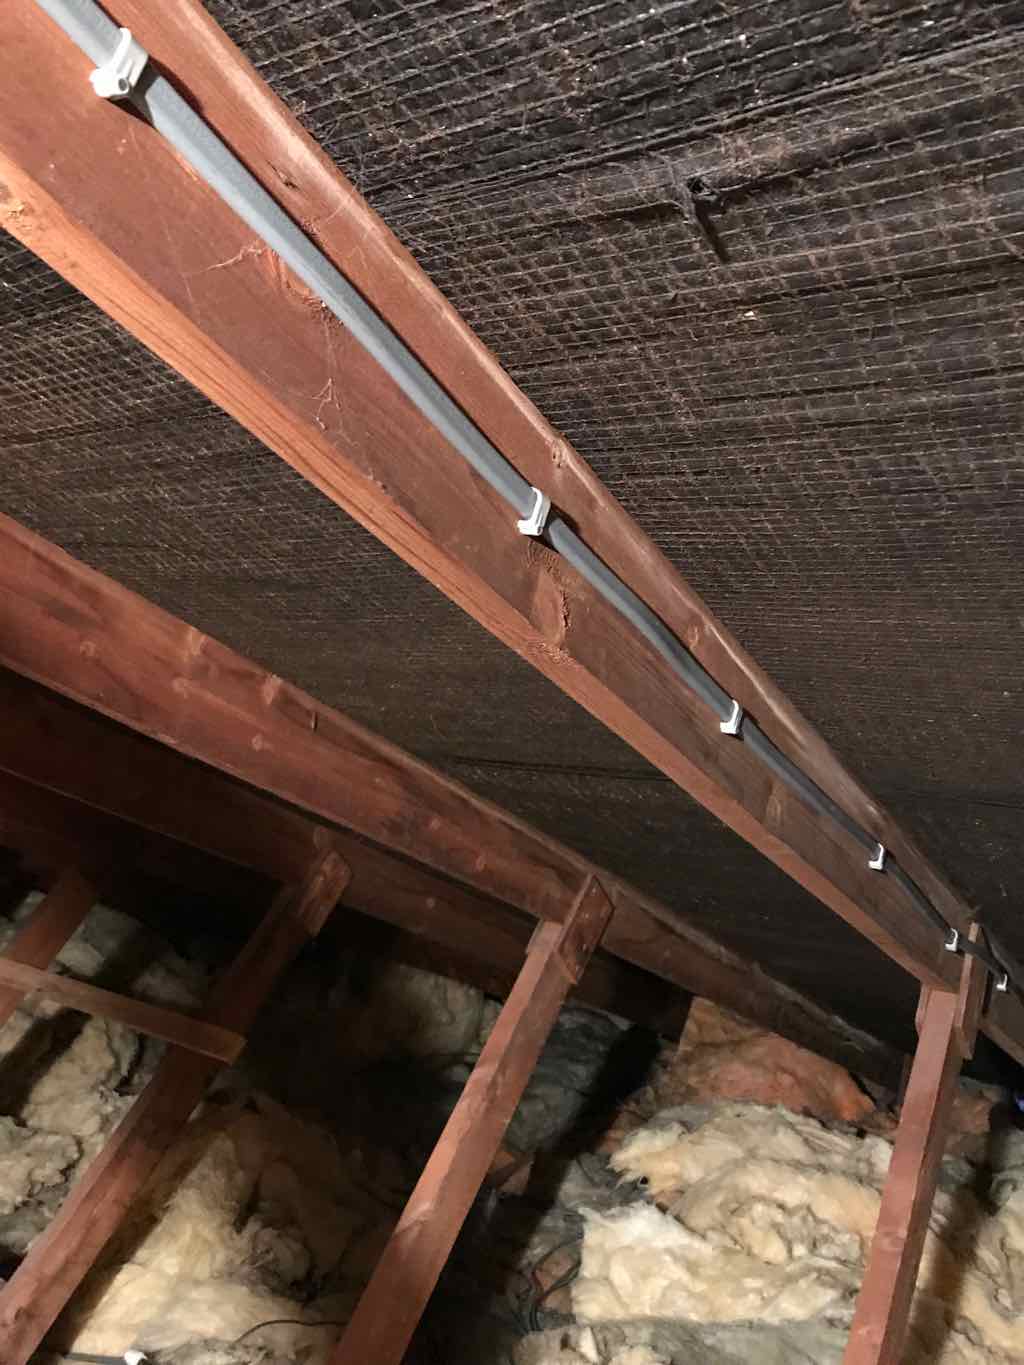 Cable clipped in loft